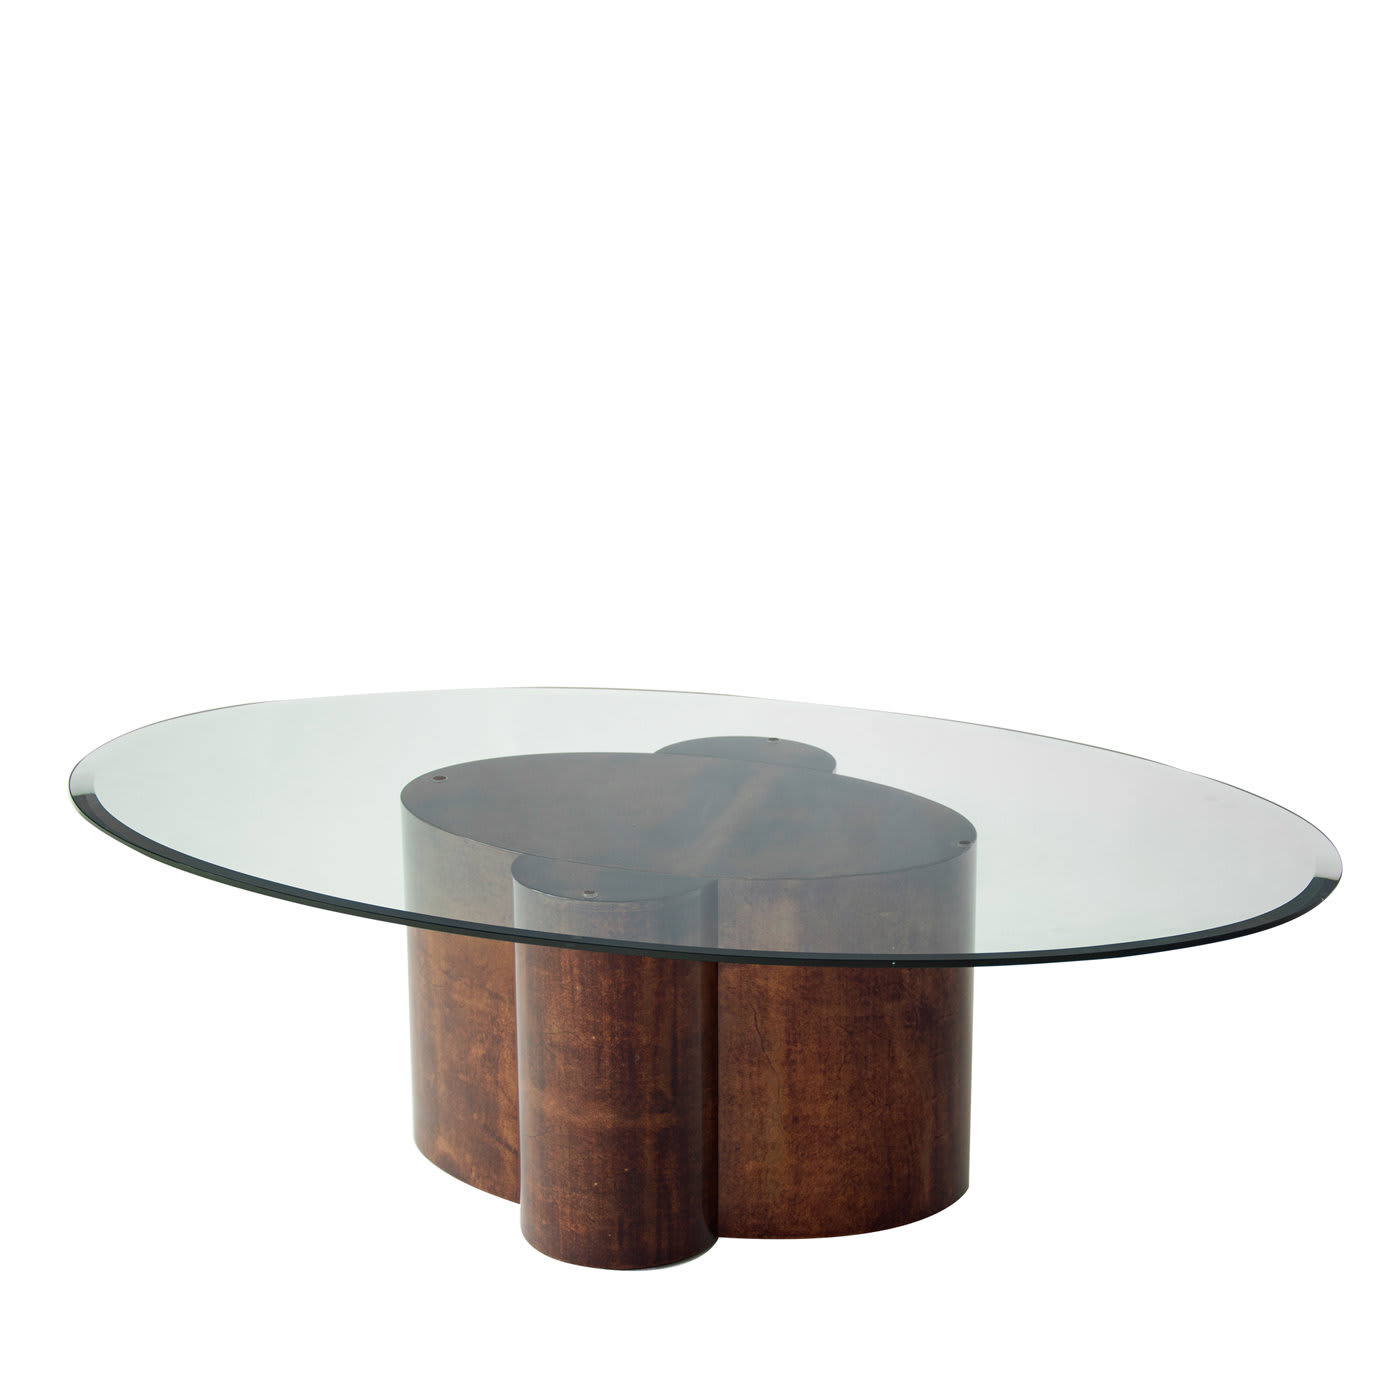 Vintage Oval Coffee Table with Glass Top - Tura